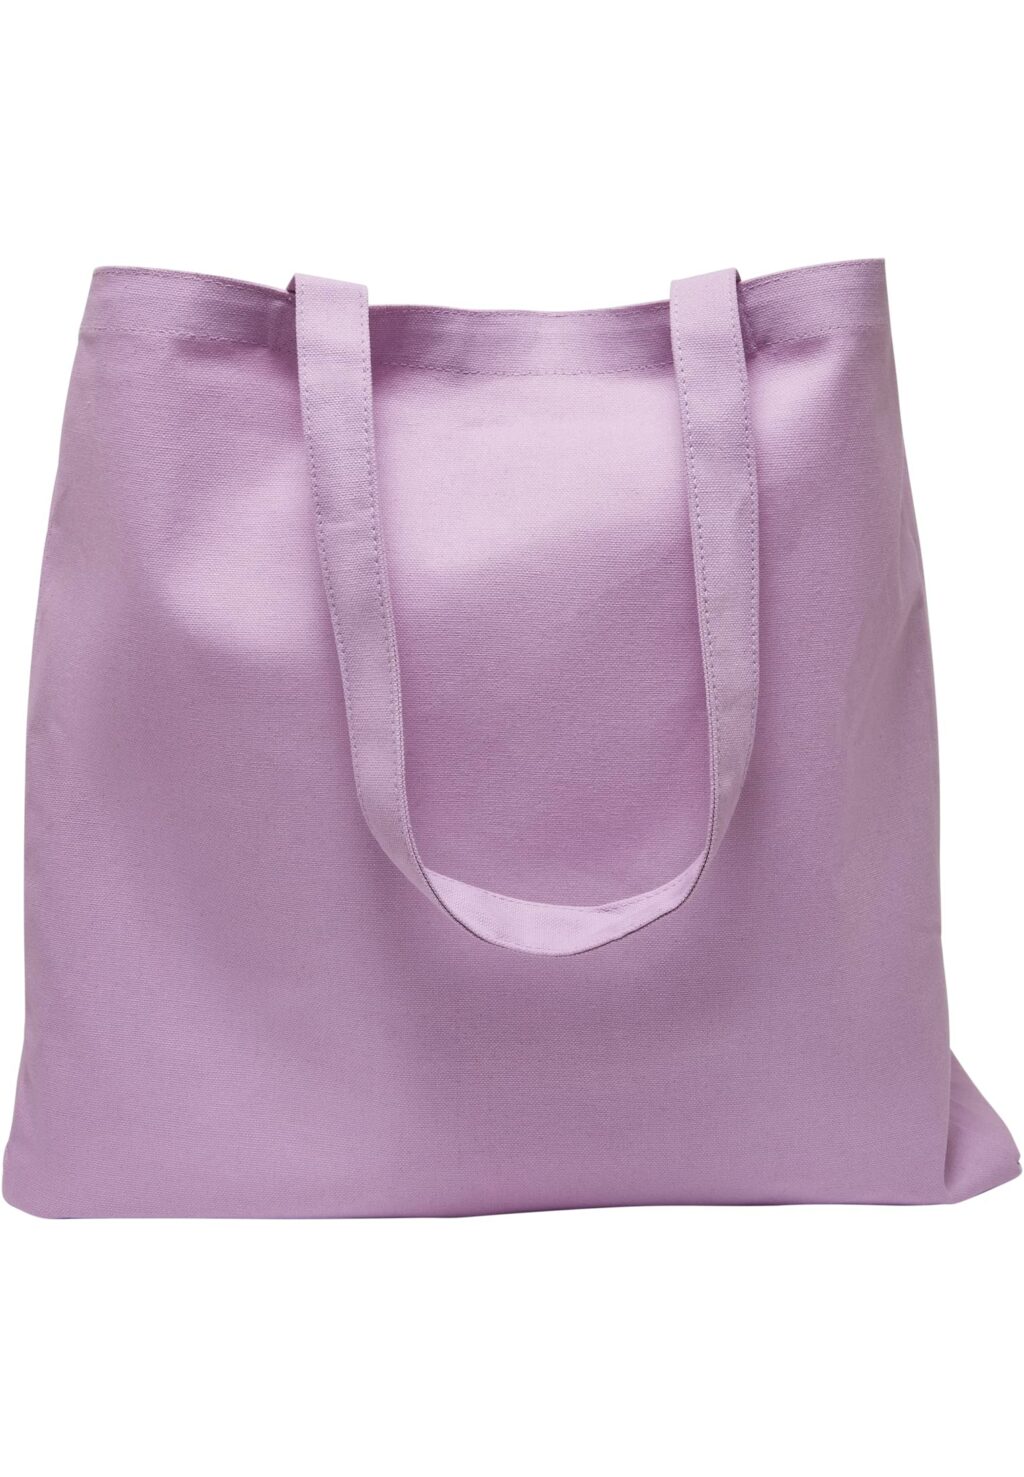 Days Before Summer Oversize Canvas Tote Bag lilac one MT2283